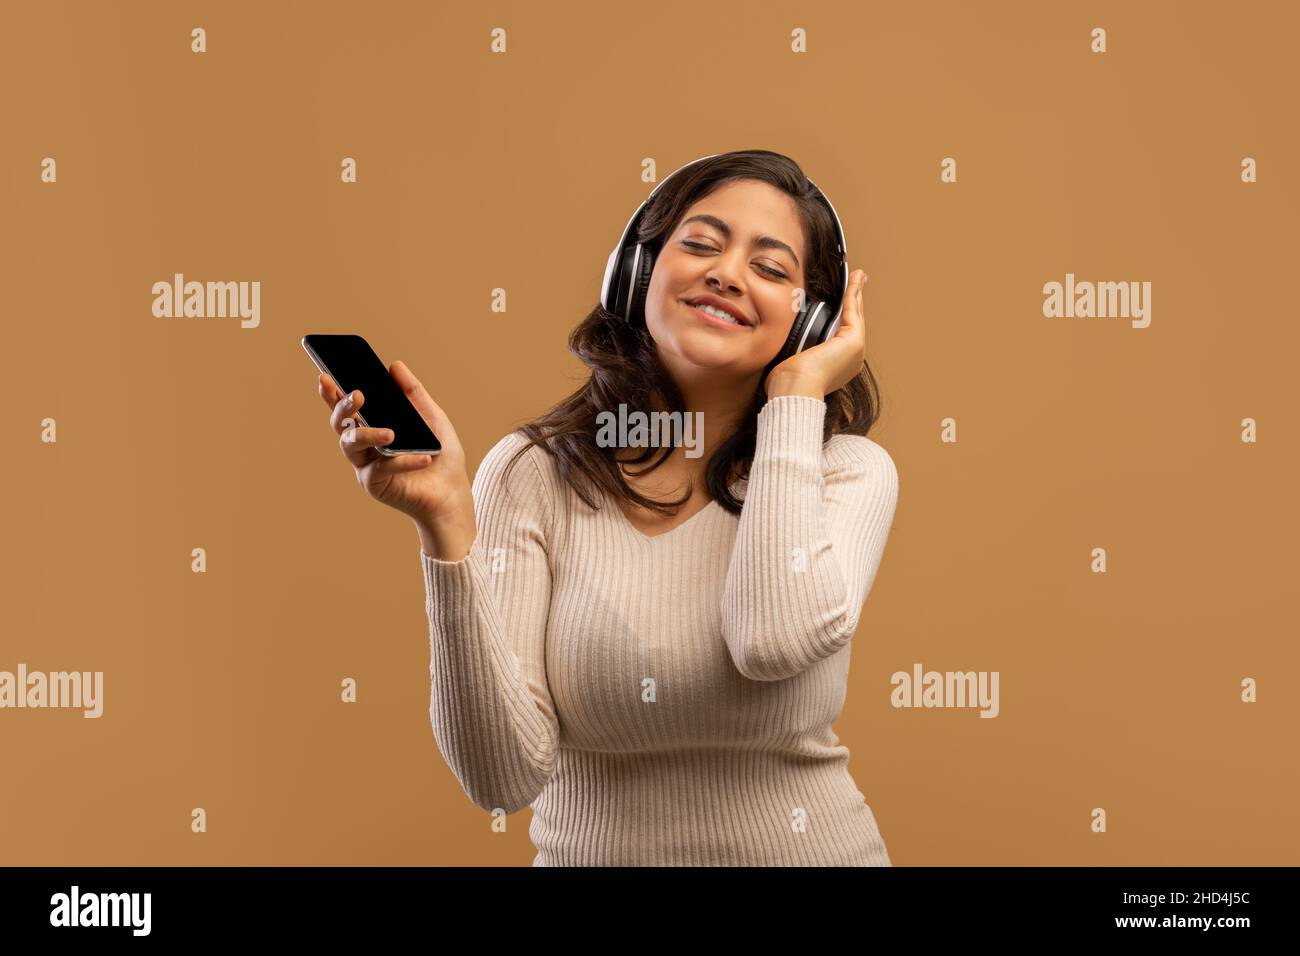 Playful arab lady with headphones and smartphone listening to music and enjoying cool playlist, beige background Stock Photo